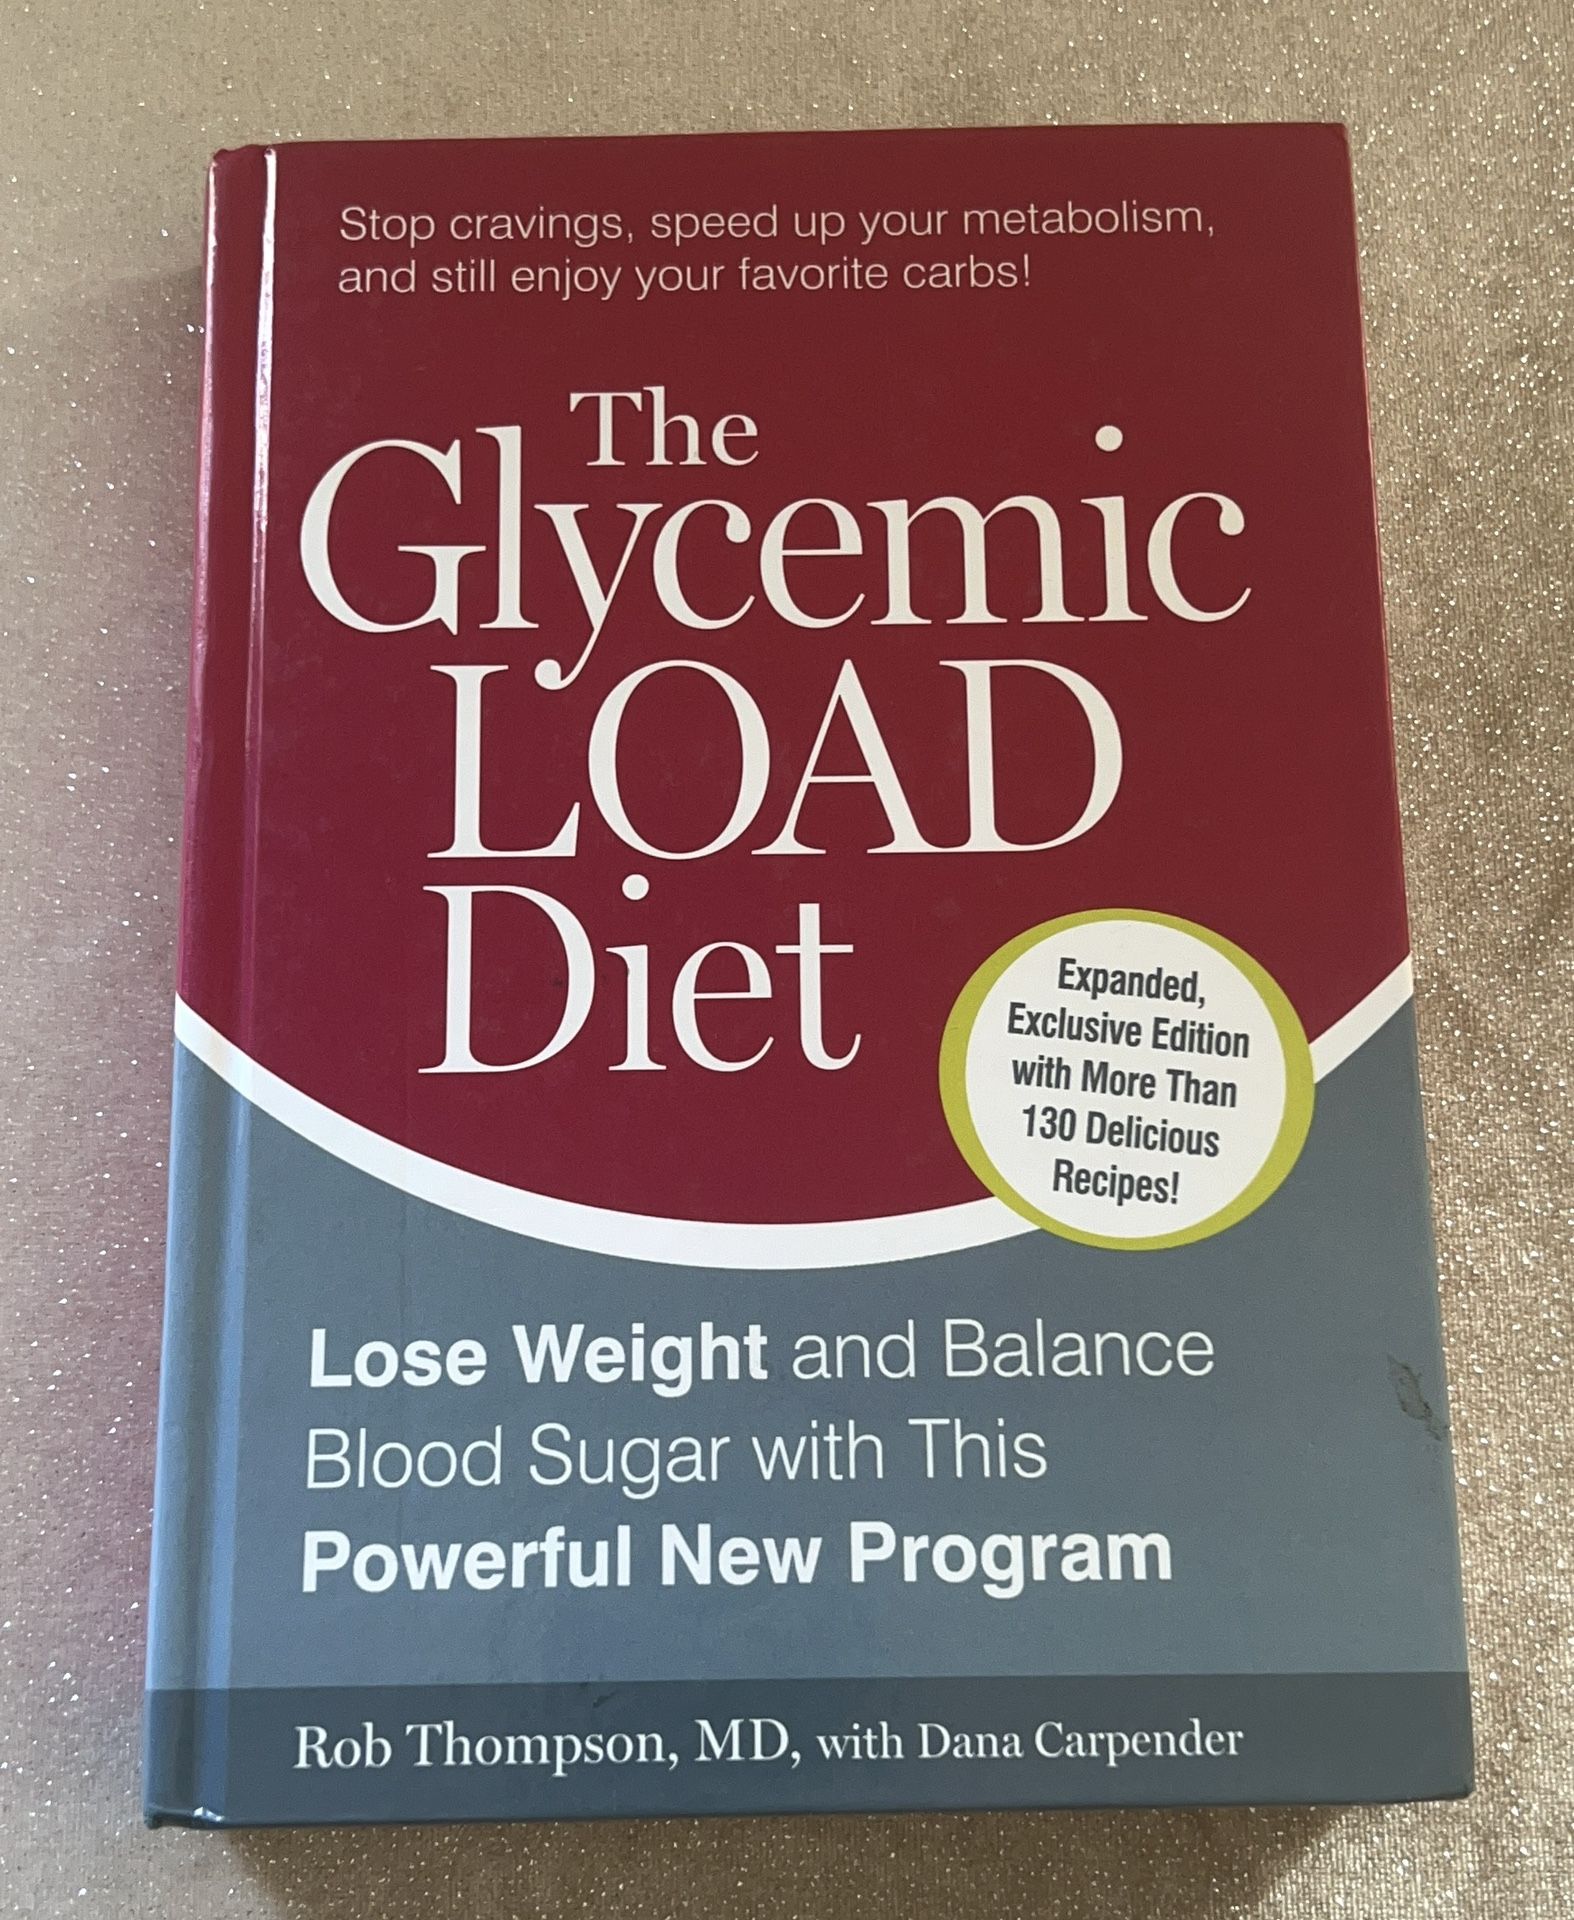 The Glycemic Load Diet by Rob Thompson